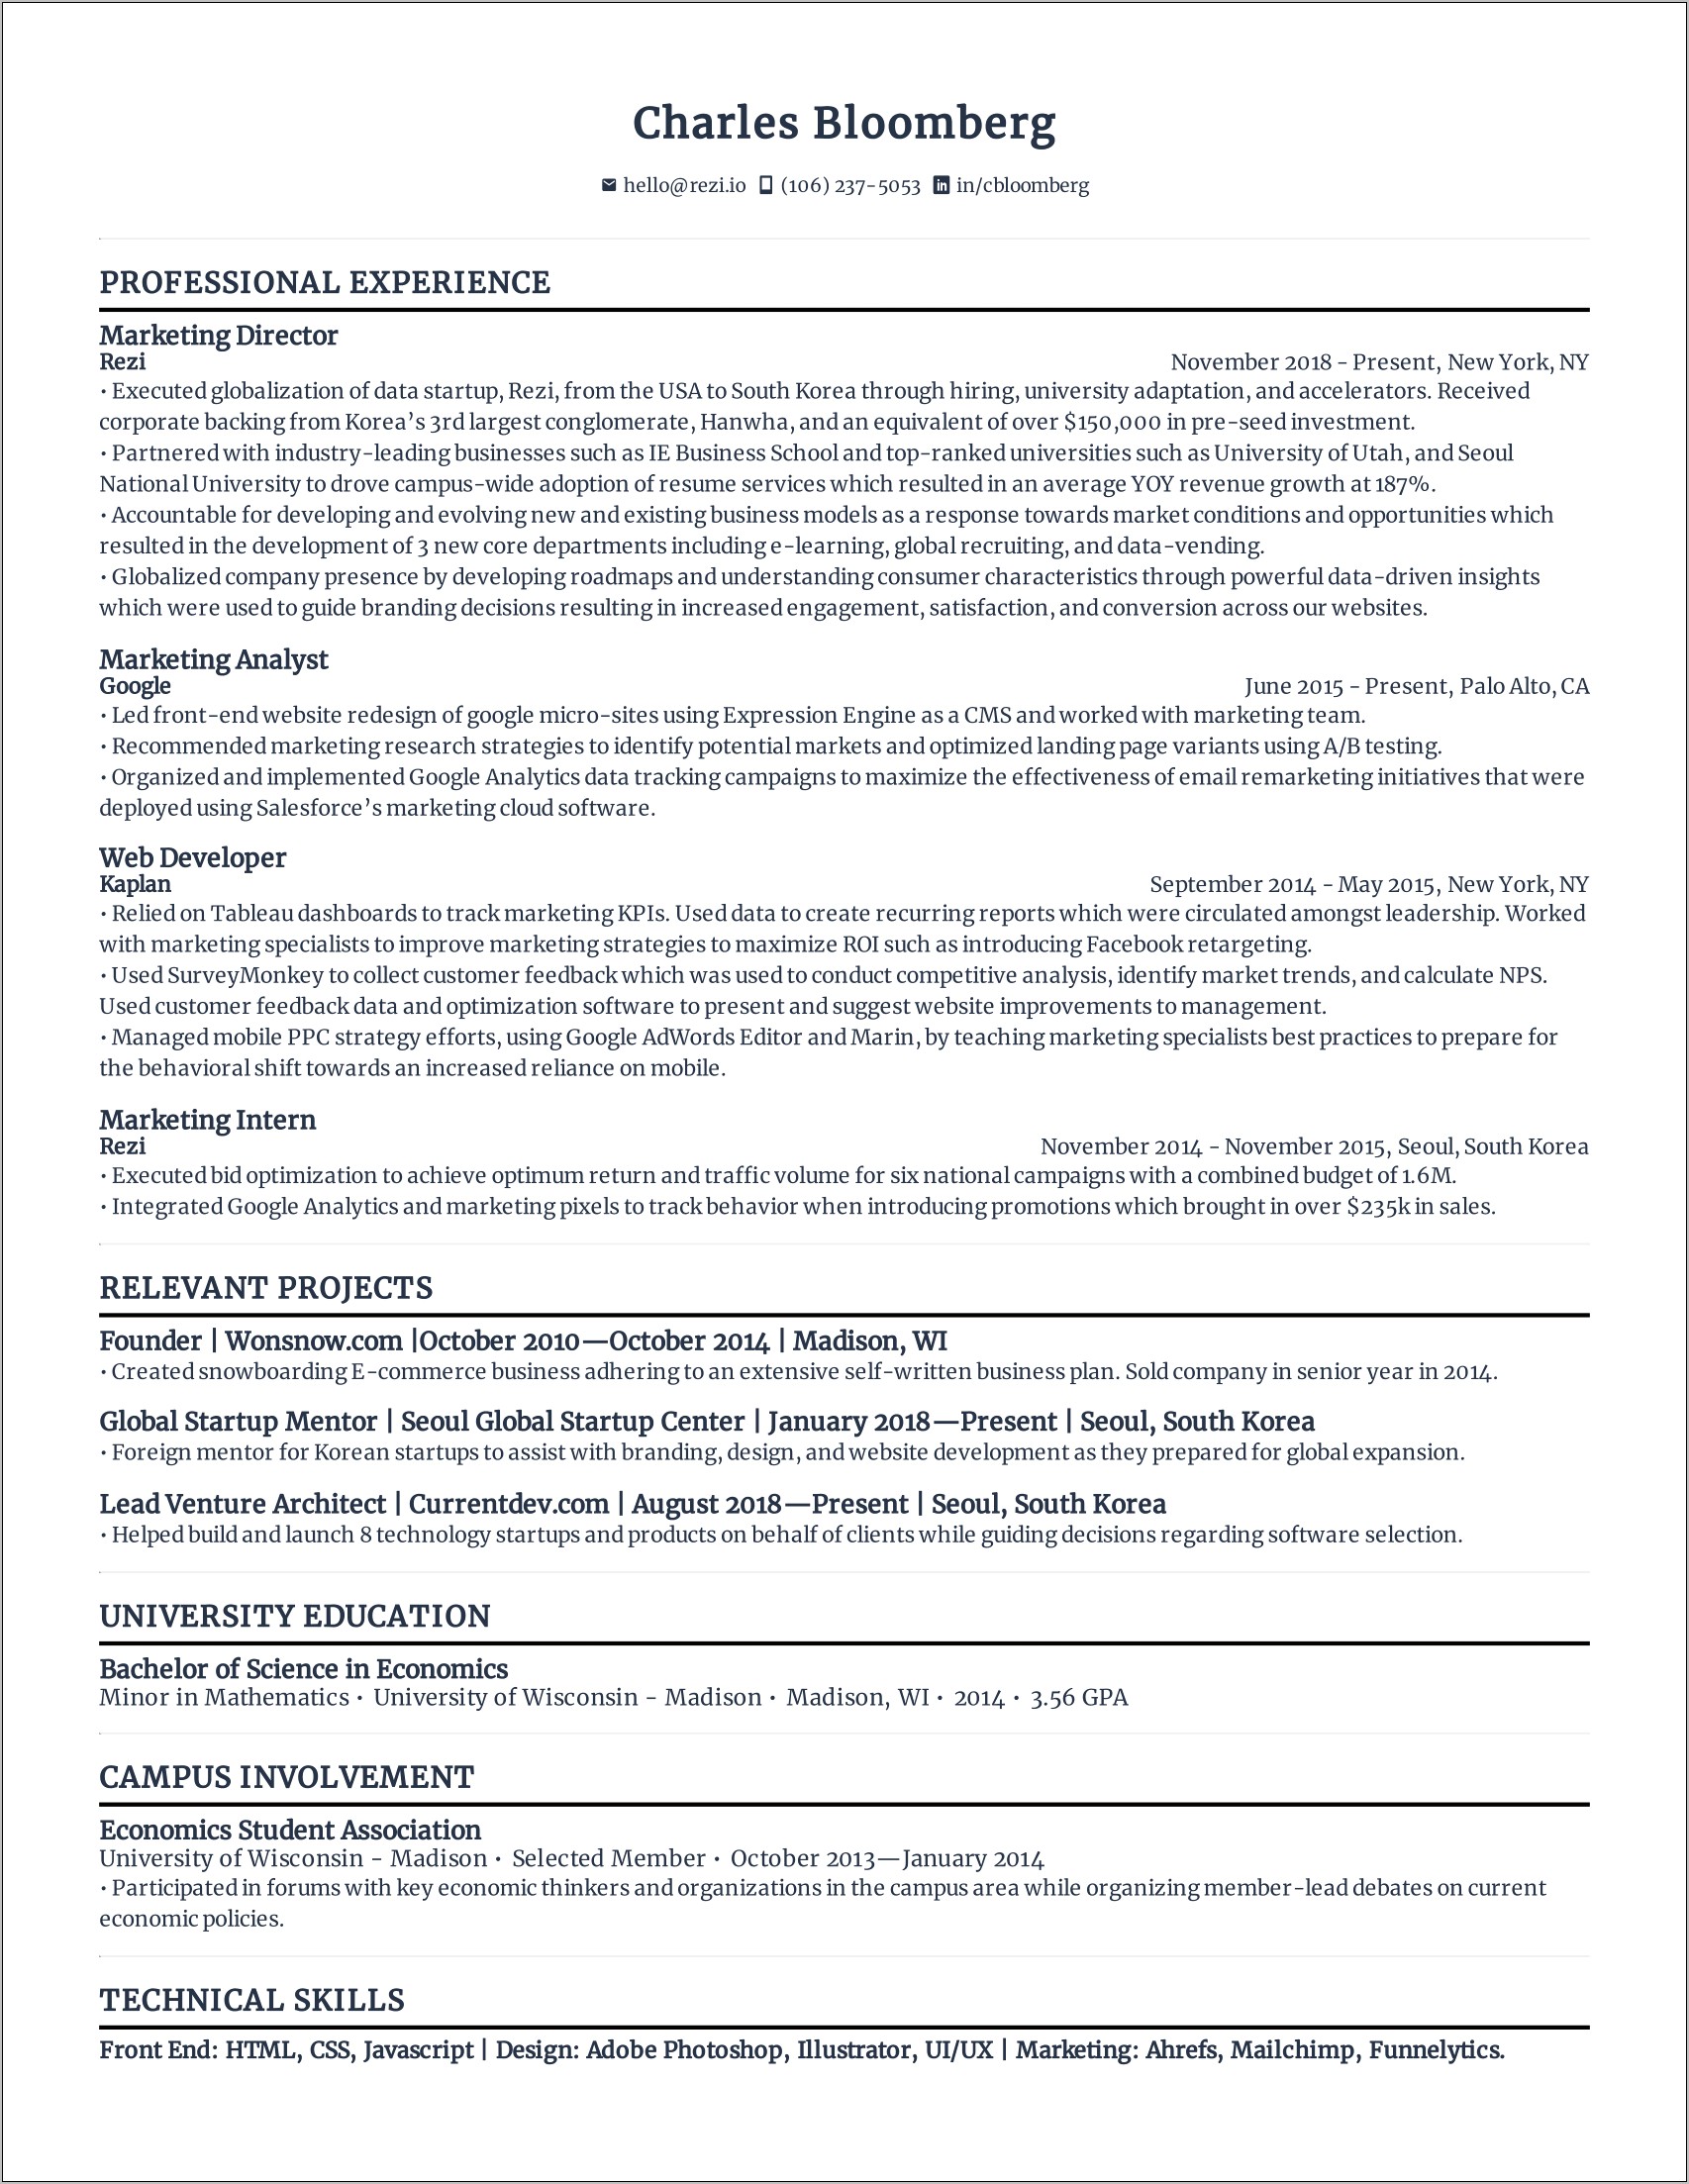 Review Best Free Resume Template Site